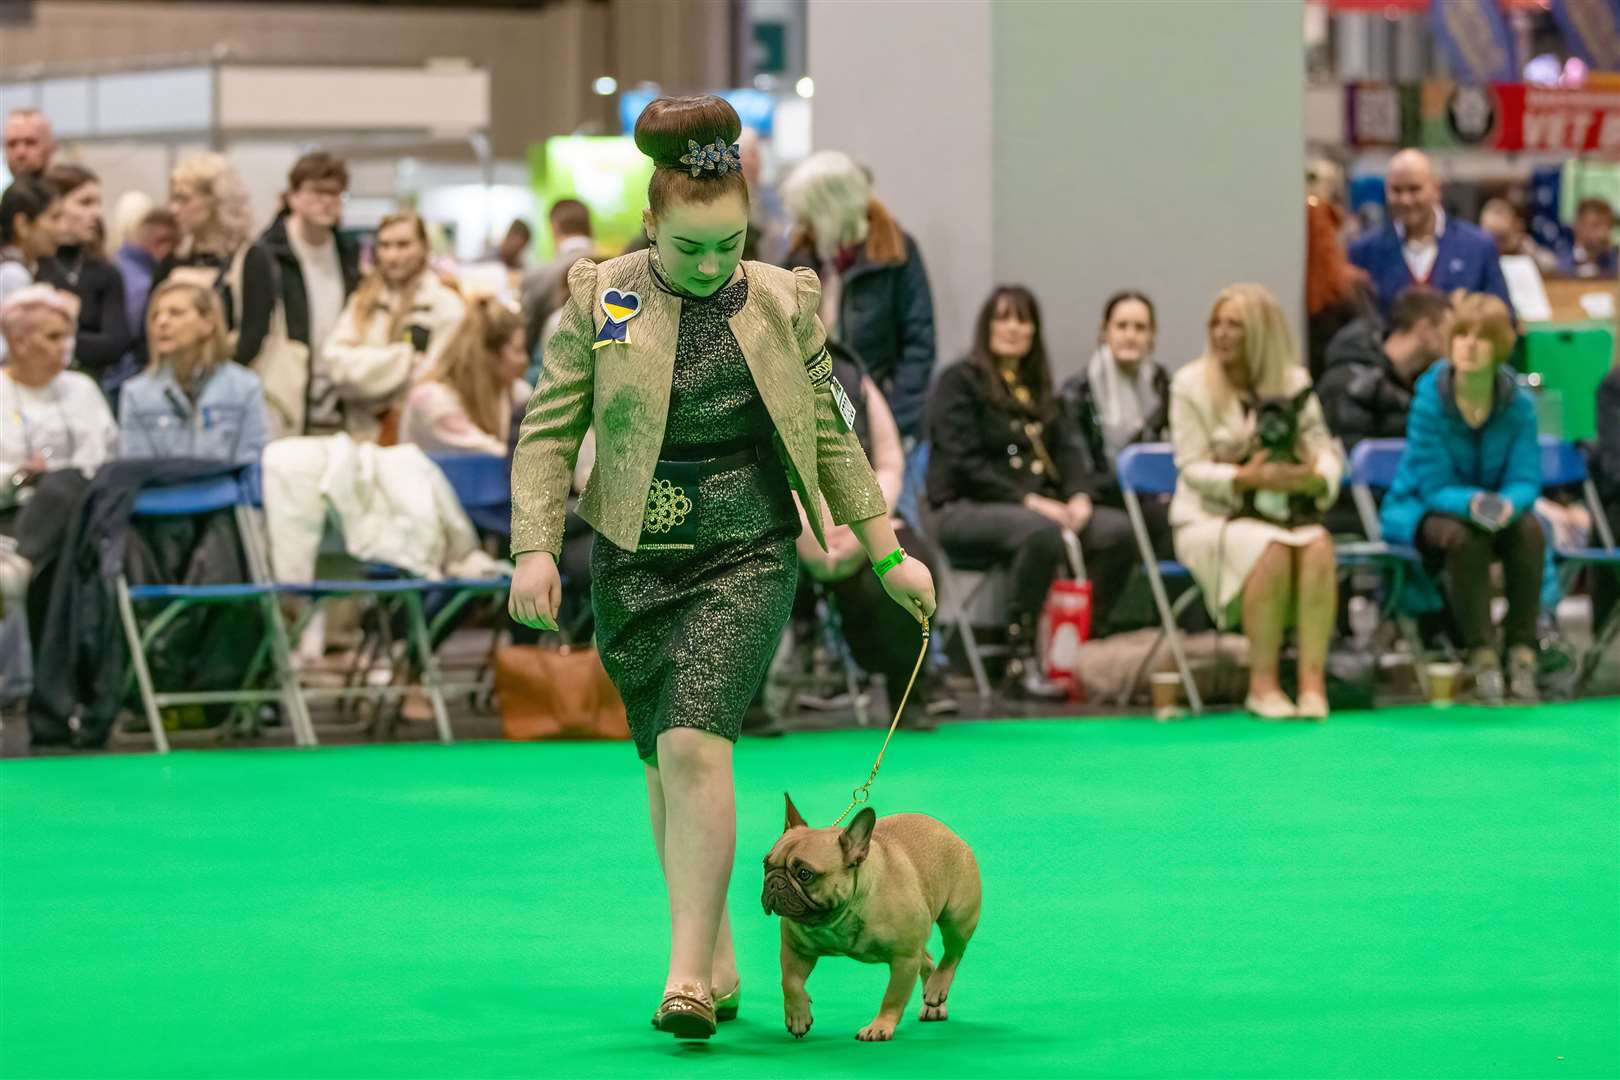 Ellissia East-Hickman from Marden at Crufts 2022. Picture: Animals News Agency